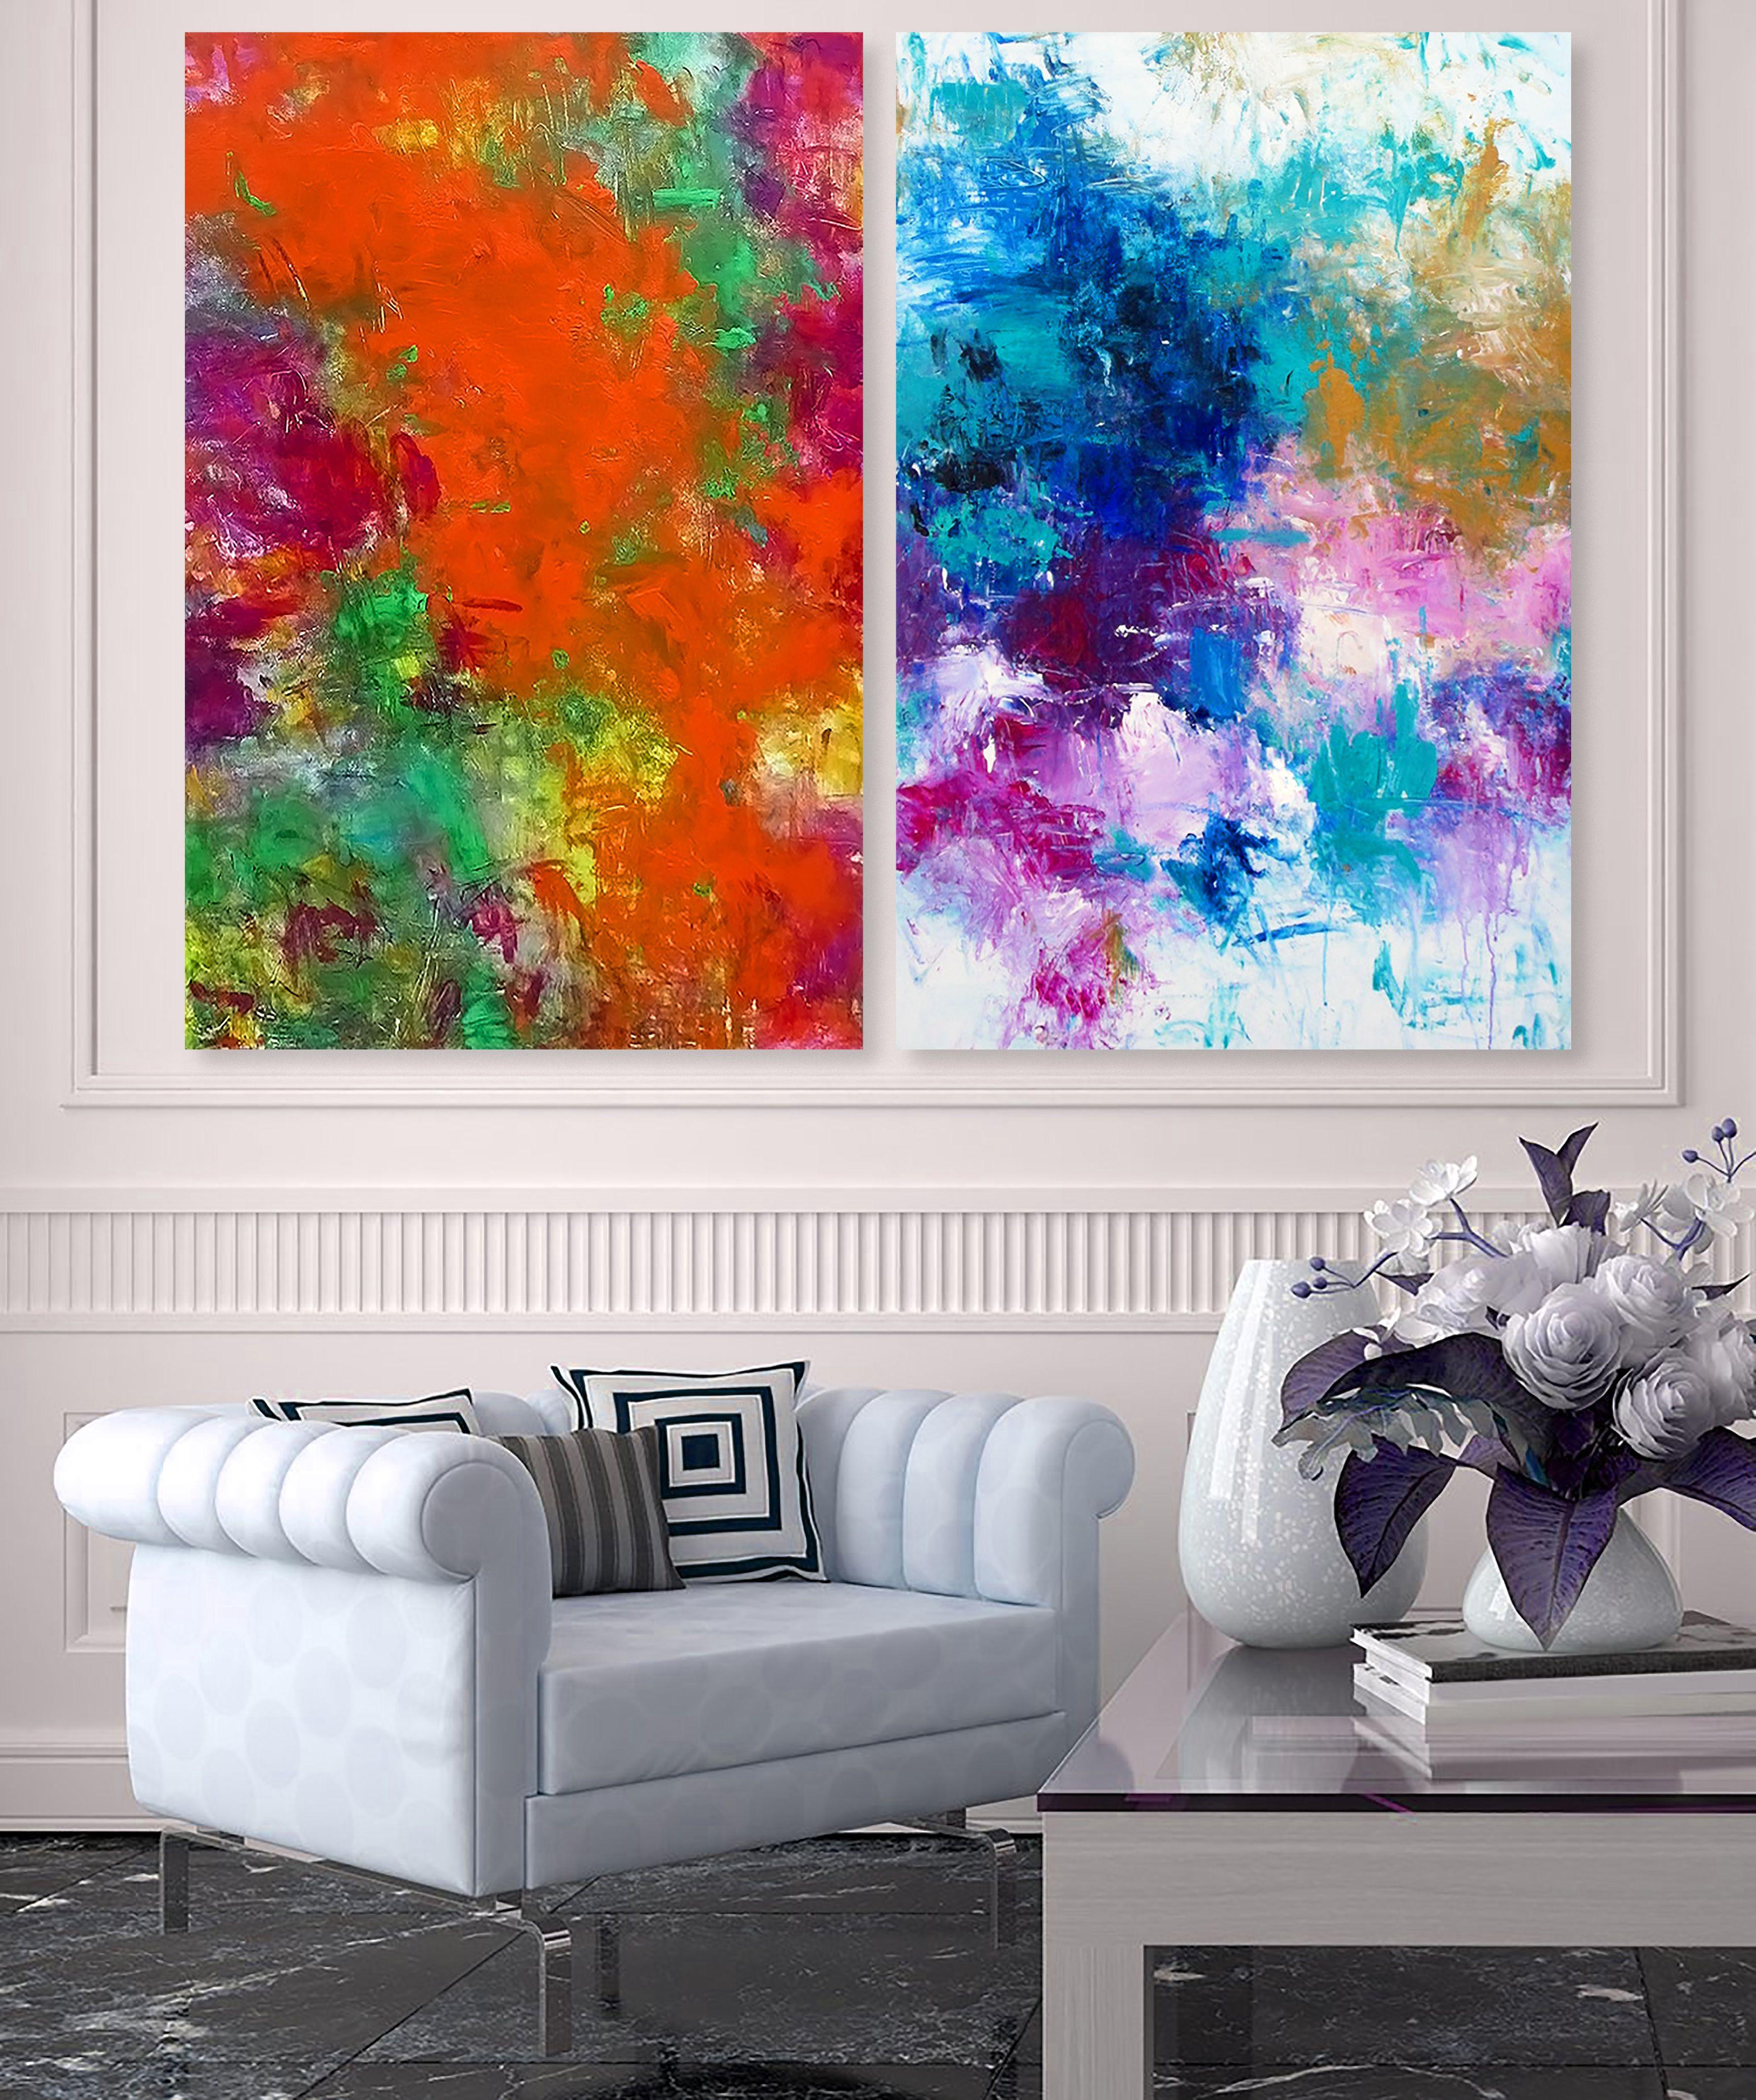 3 paintings together